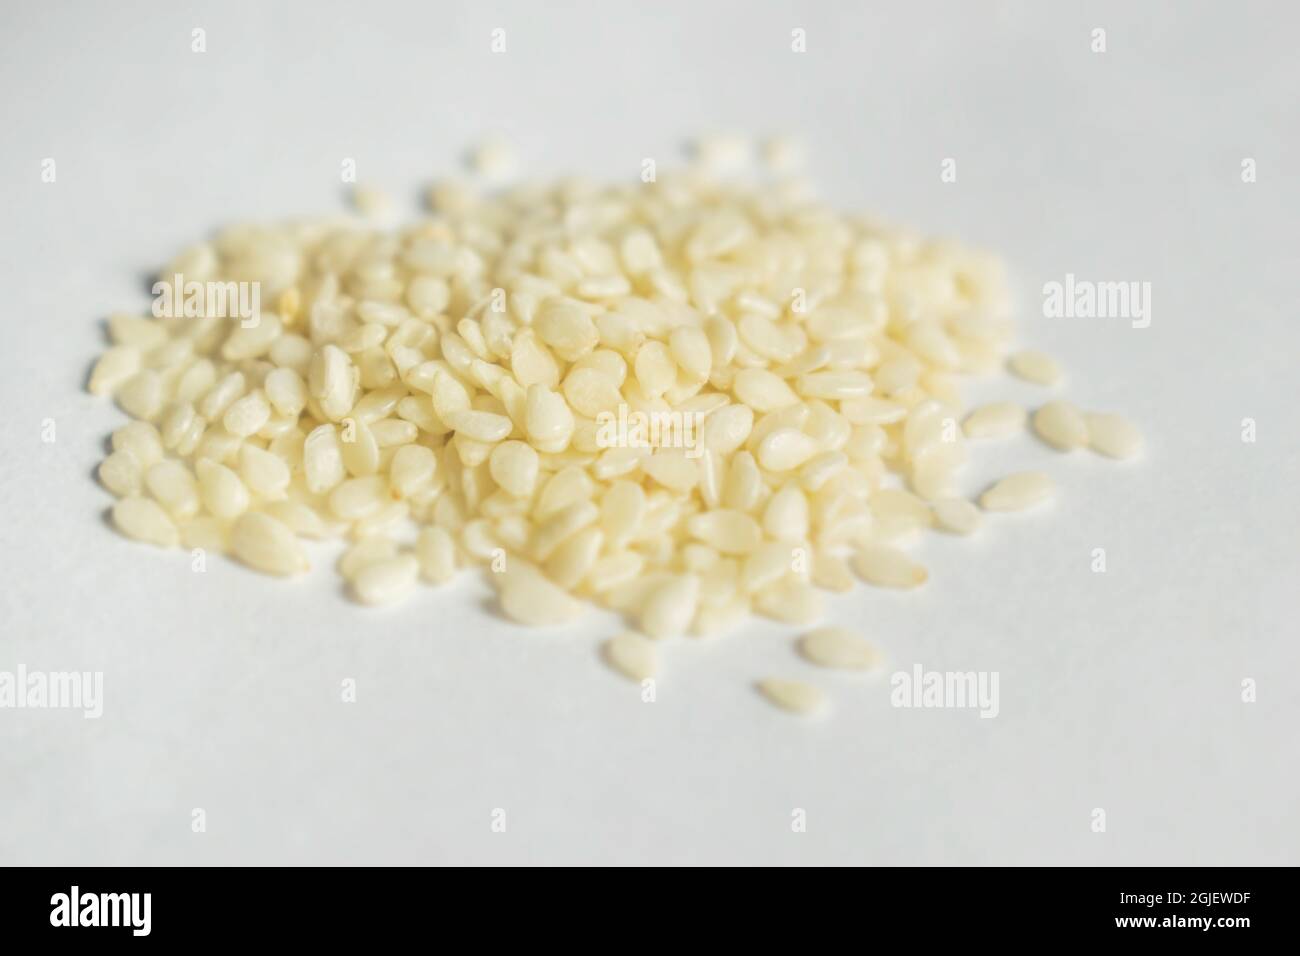 White Sesame seeds are flat, pear-shaped seeds with an off-white color Stock Photo